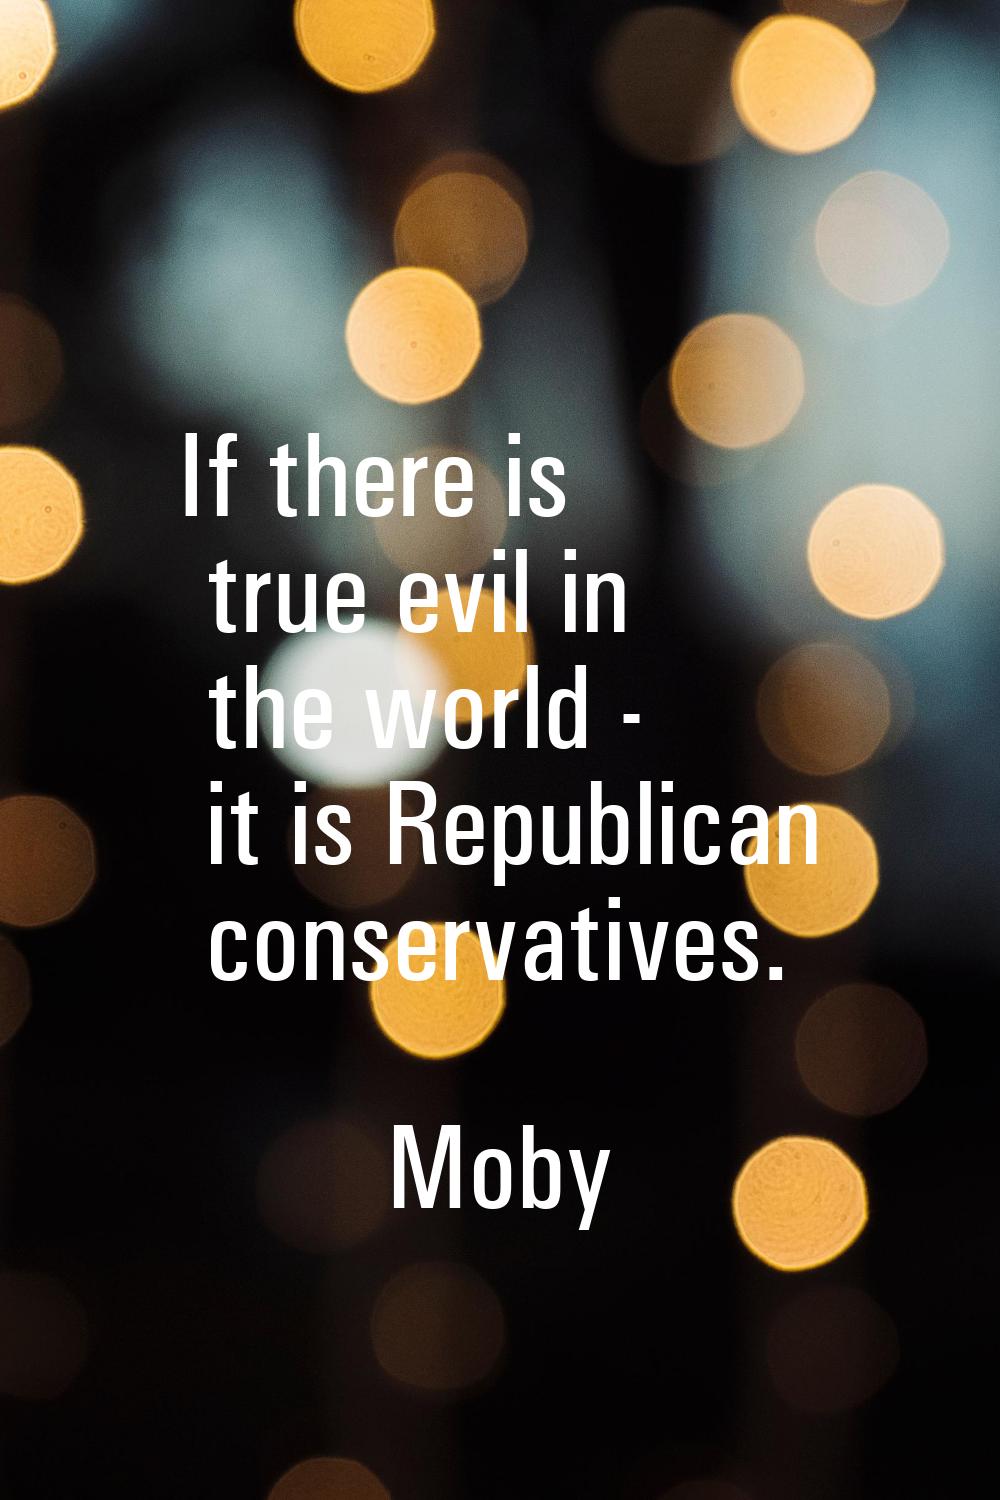 If there is true evil in the world - it is Republican conservatives.